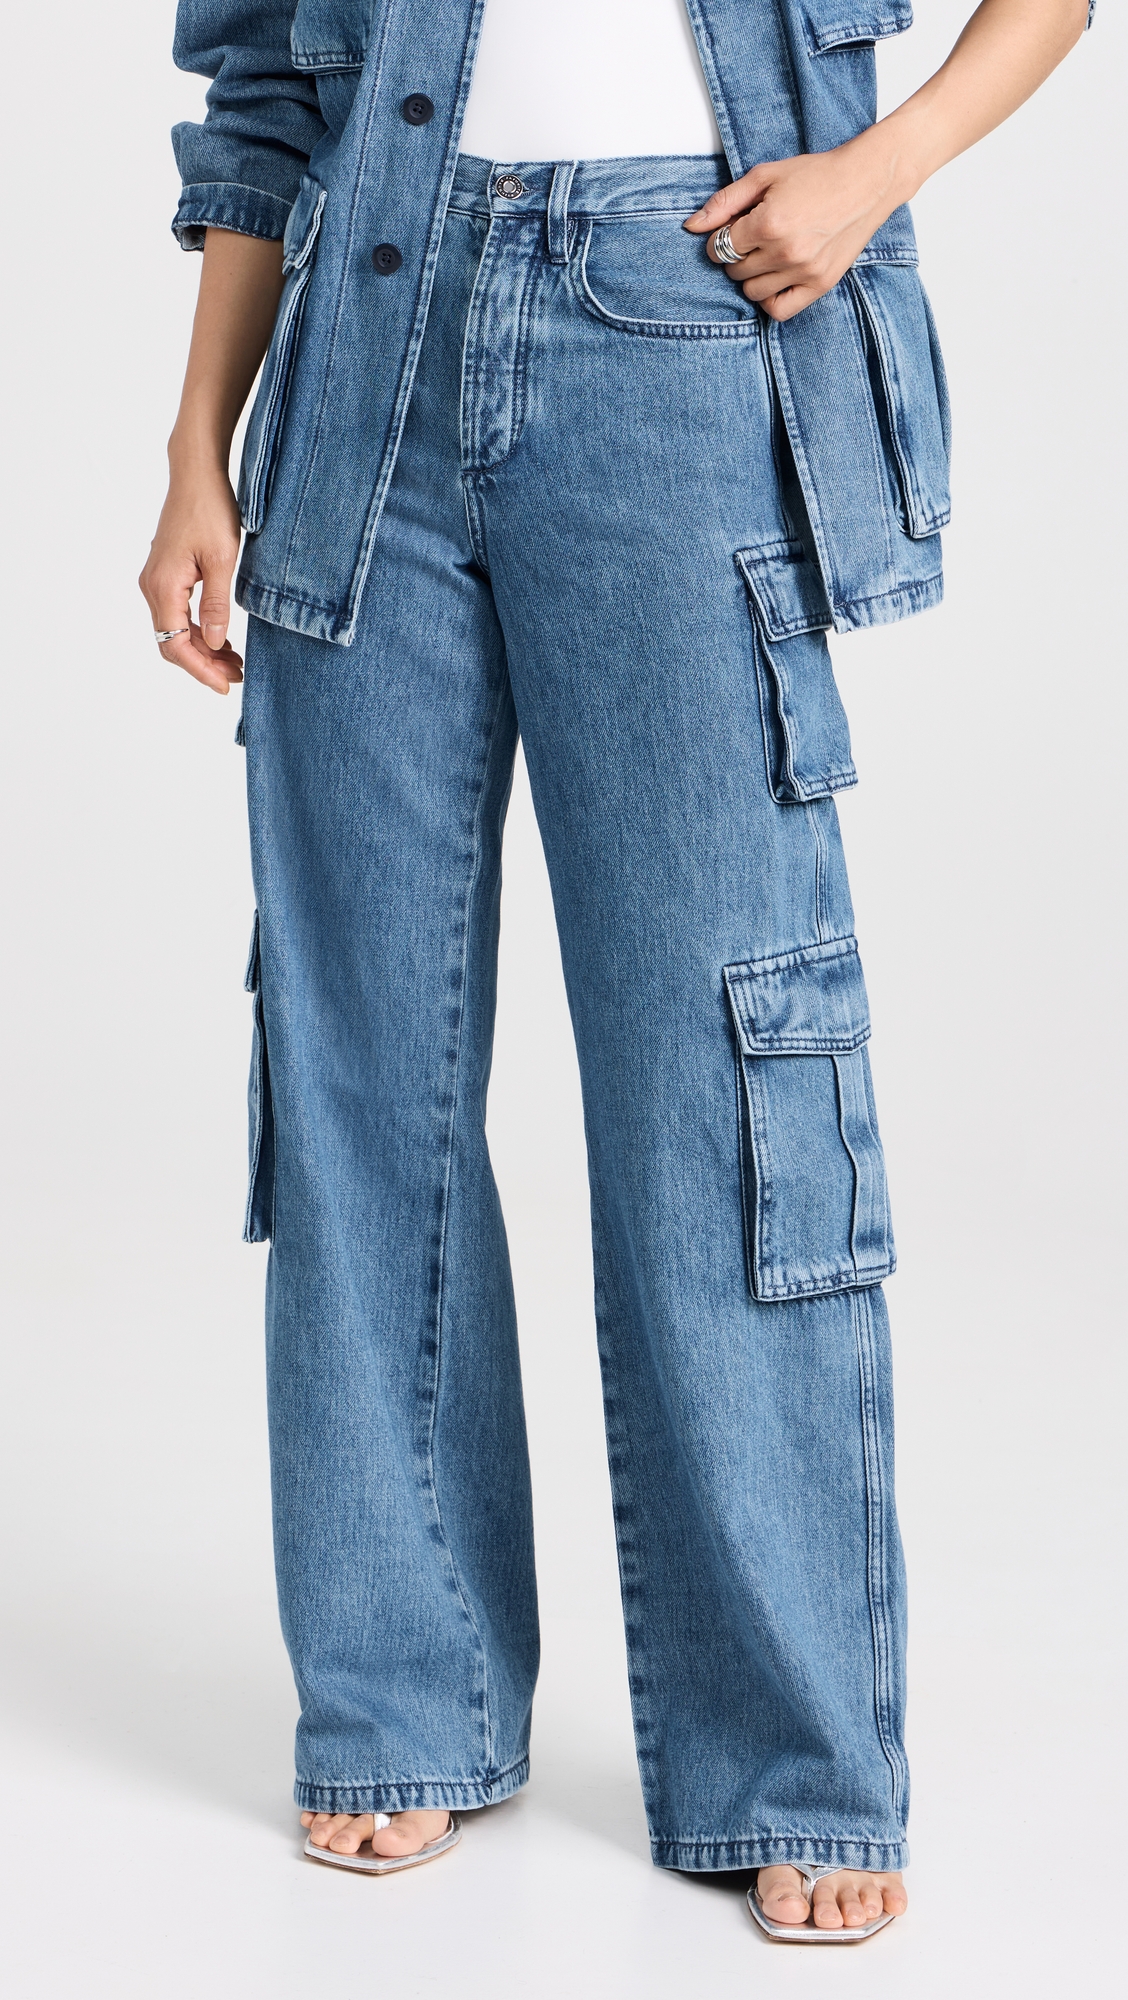 The Carly Cargo Jeans